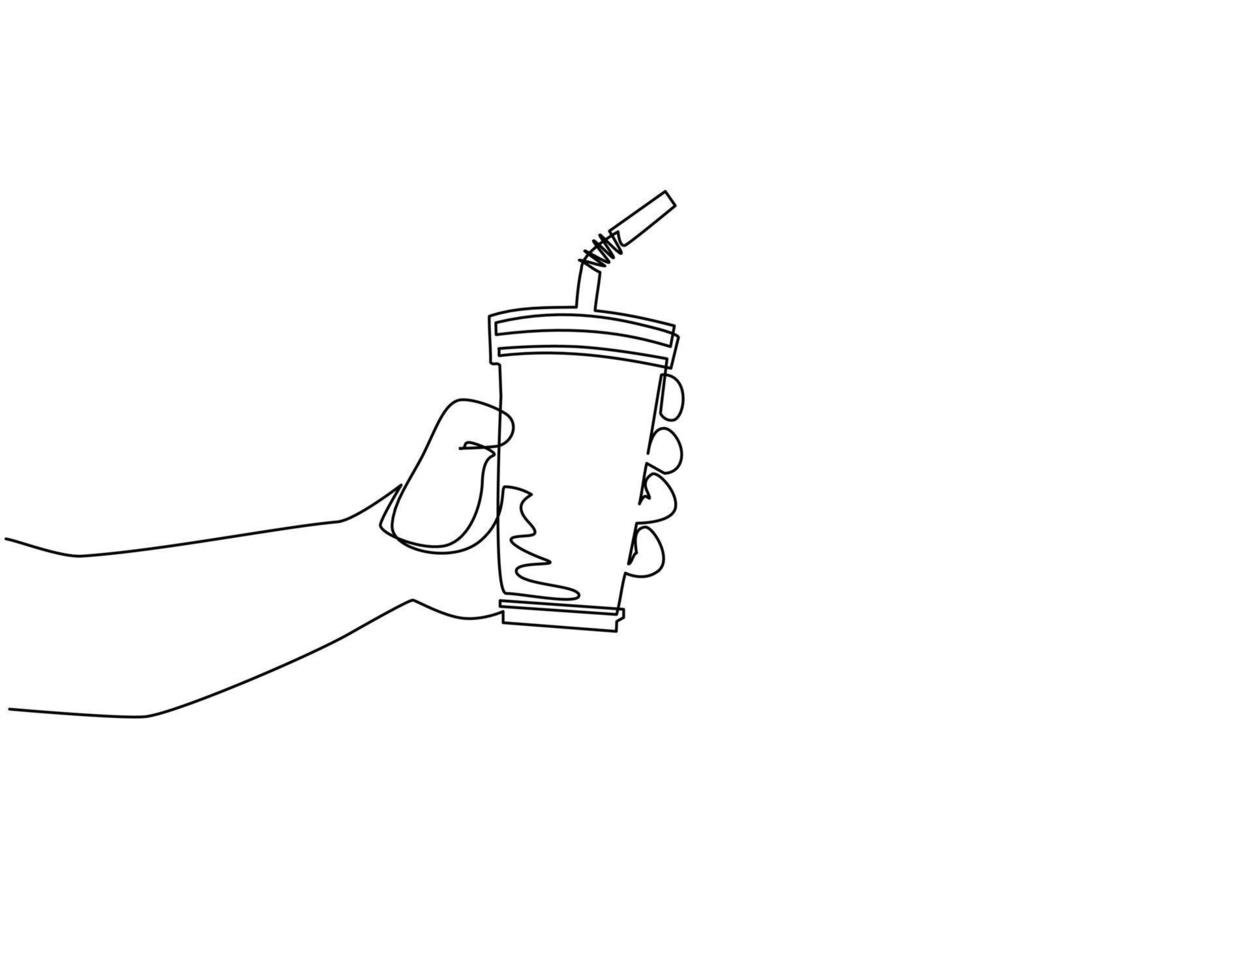 Single one line drawing hand hold paper cup. Male hand holding paper cup with straw on white background. For restaurant or cafe drink menu. Modern continuous line draw design vector illustration